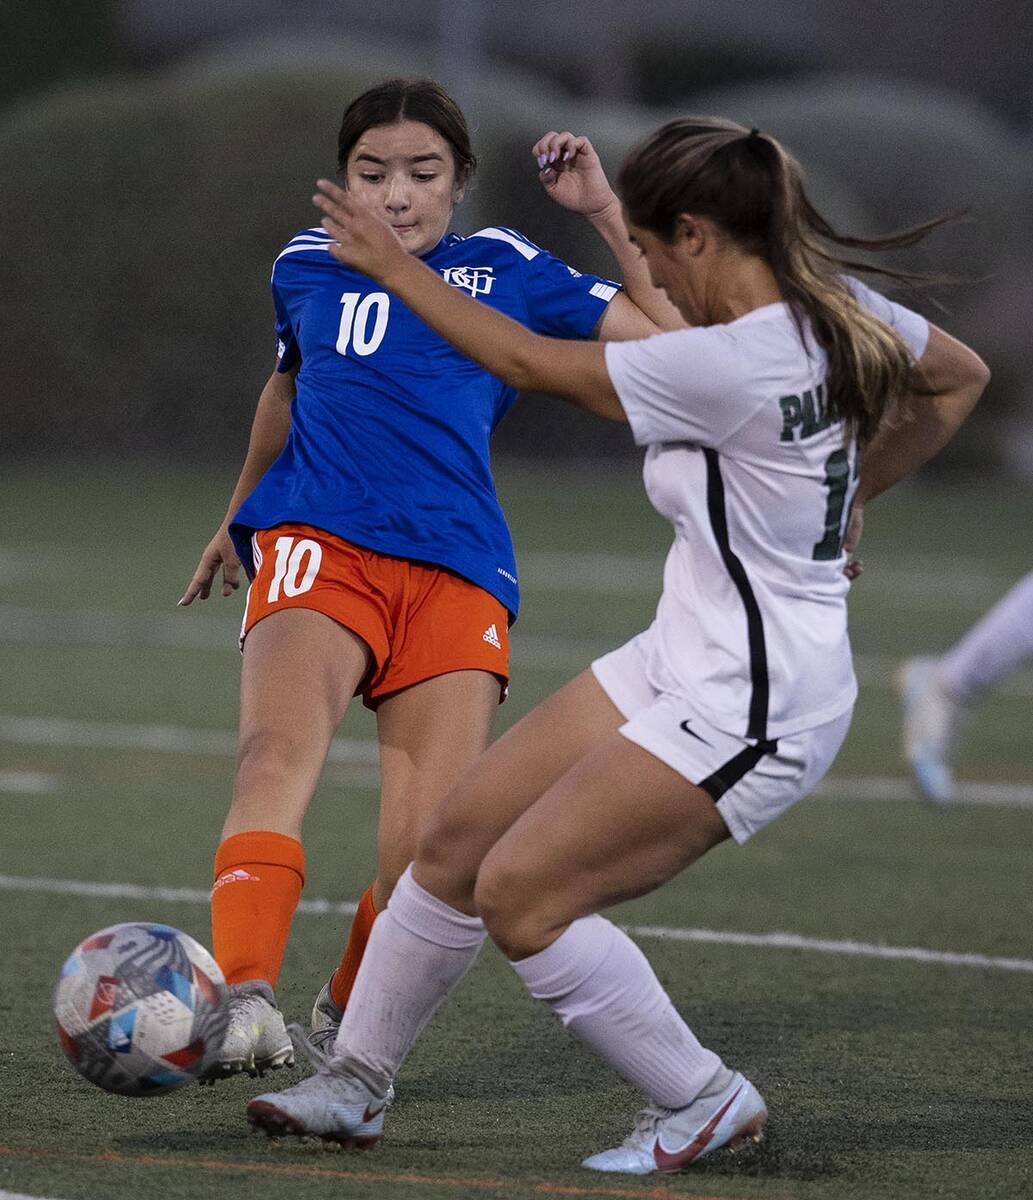 Bishop Gorman's Stephanie Hackett (10) and Palo Verde's Malaya Hill (12) during the first half ...